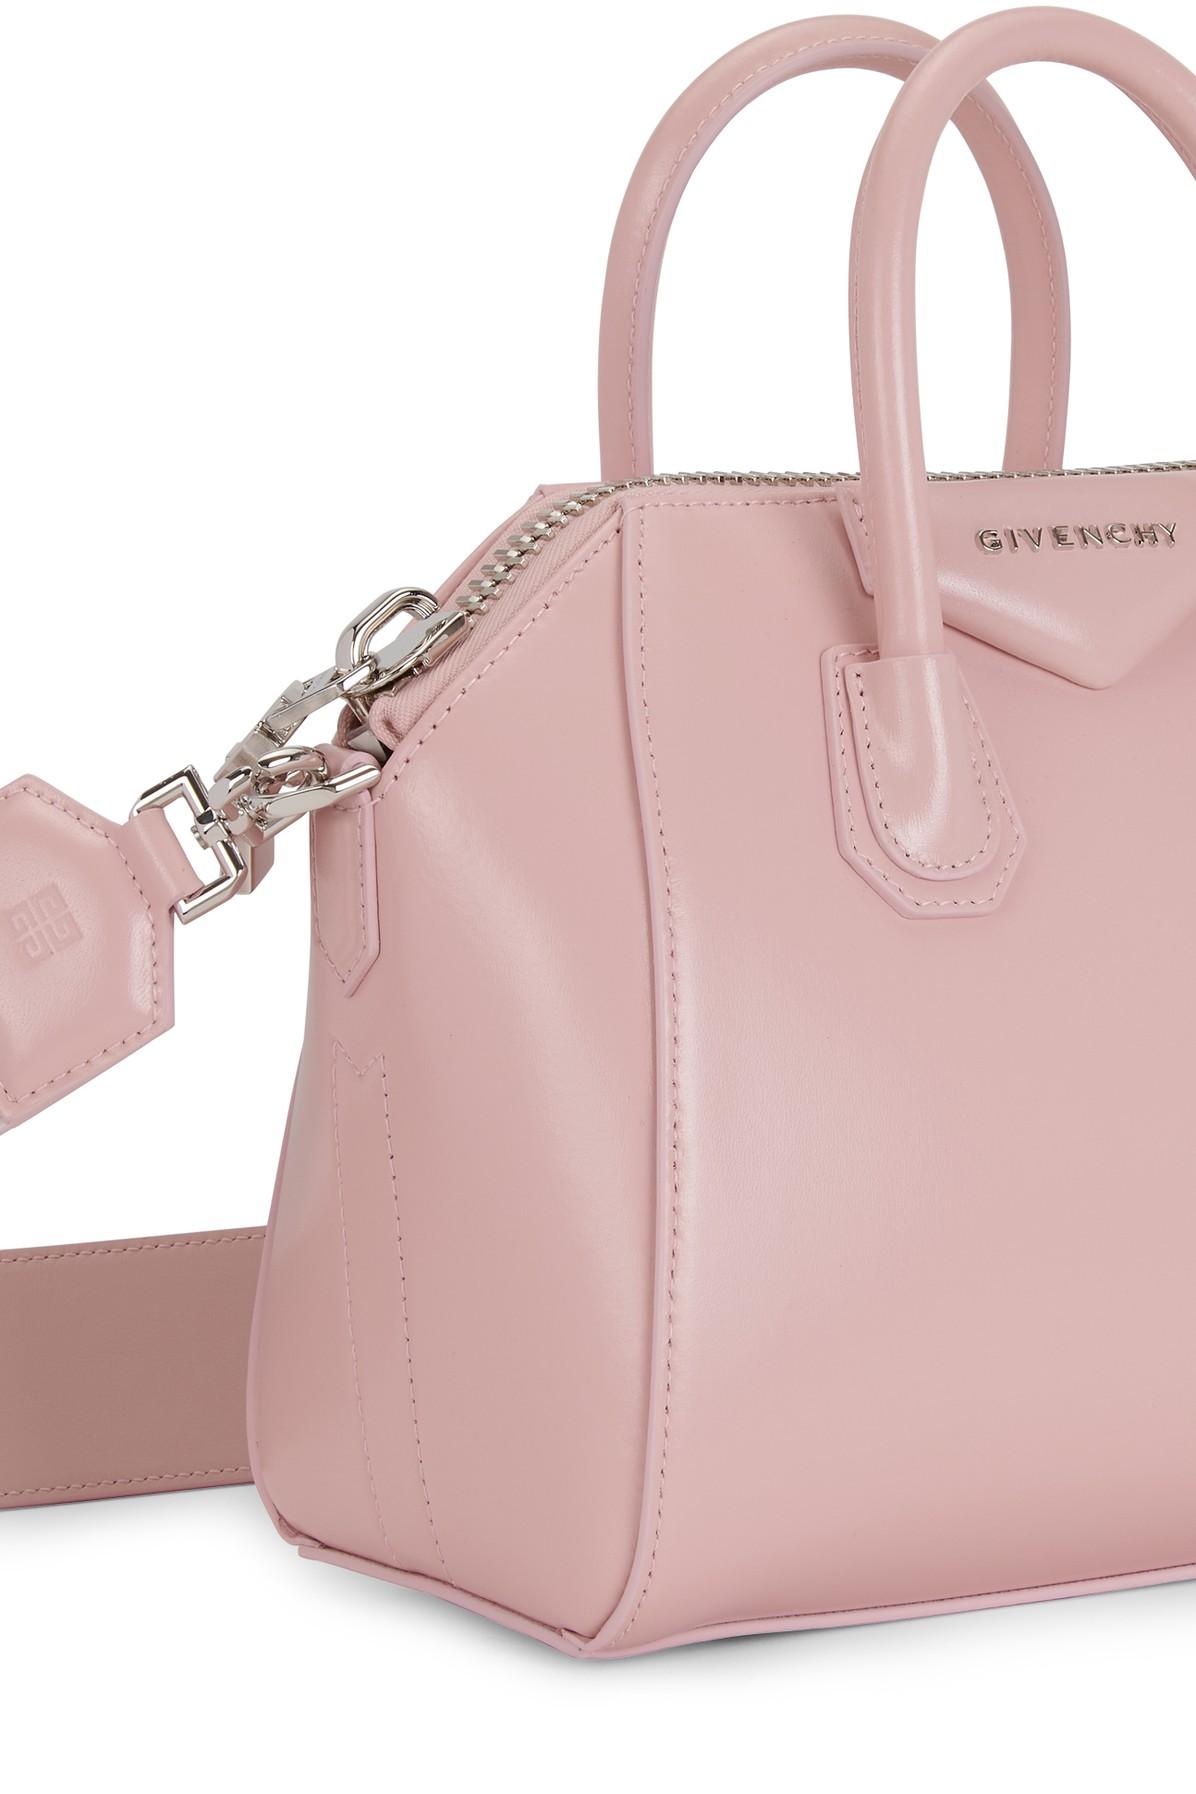 Givenchy Min Antigona Bag With Tag Effect Heart Print in Pink | Lyst